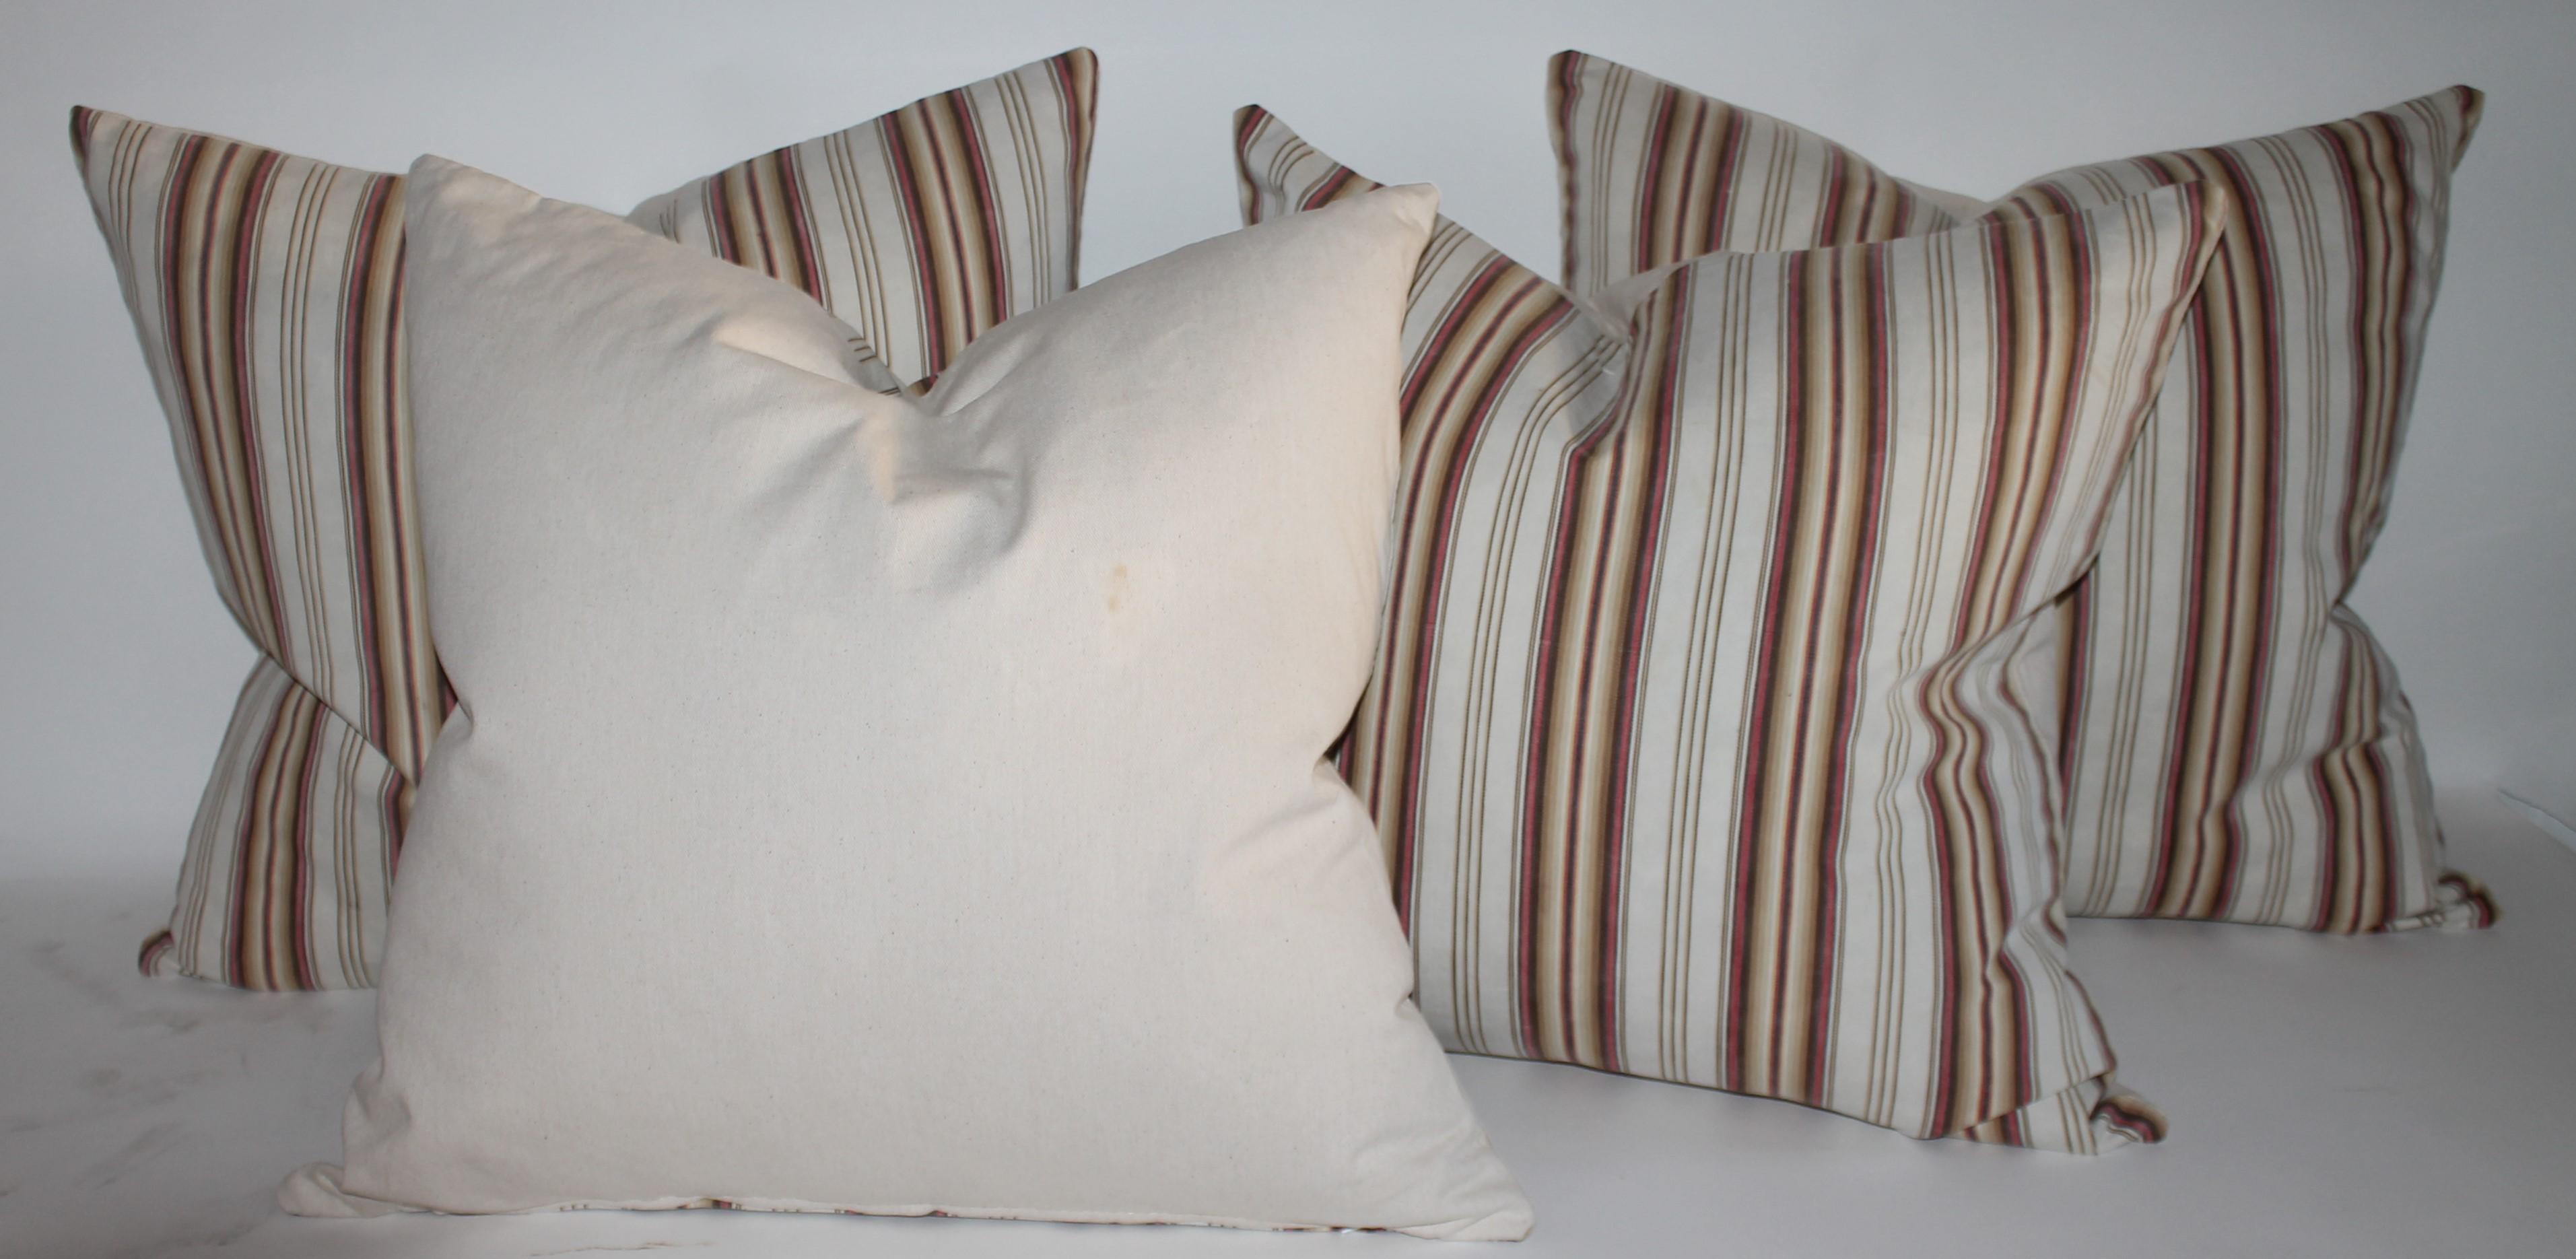 Collection of four 19thc brown & tan ticking striped pillows. Selling a pair of 20 x 20s and a pair of 22 x 22. Total of four pillows.